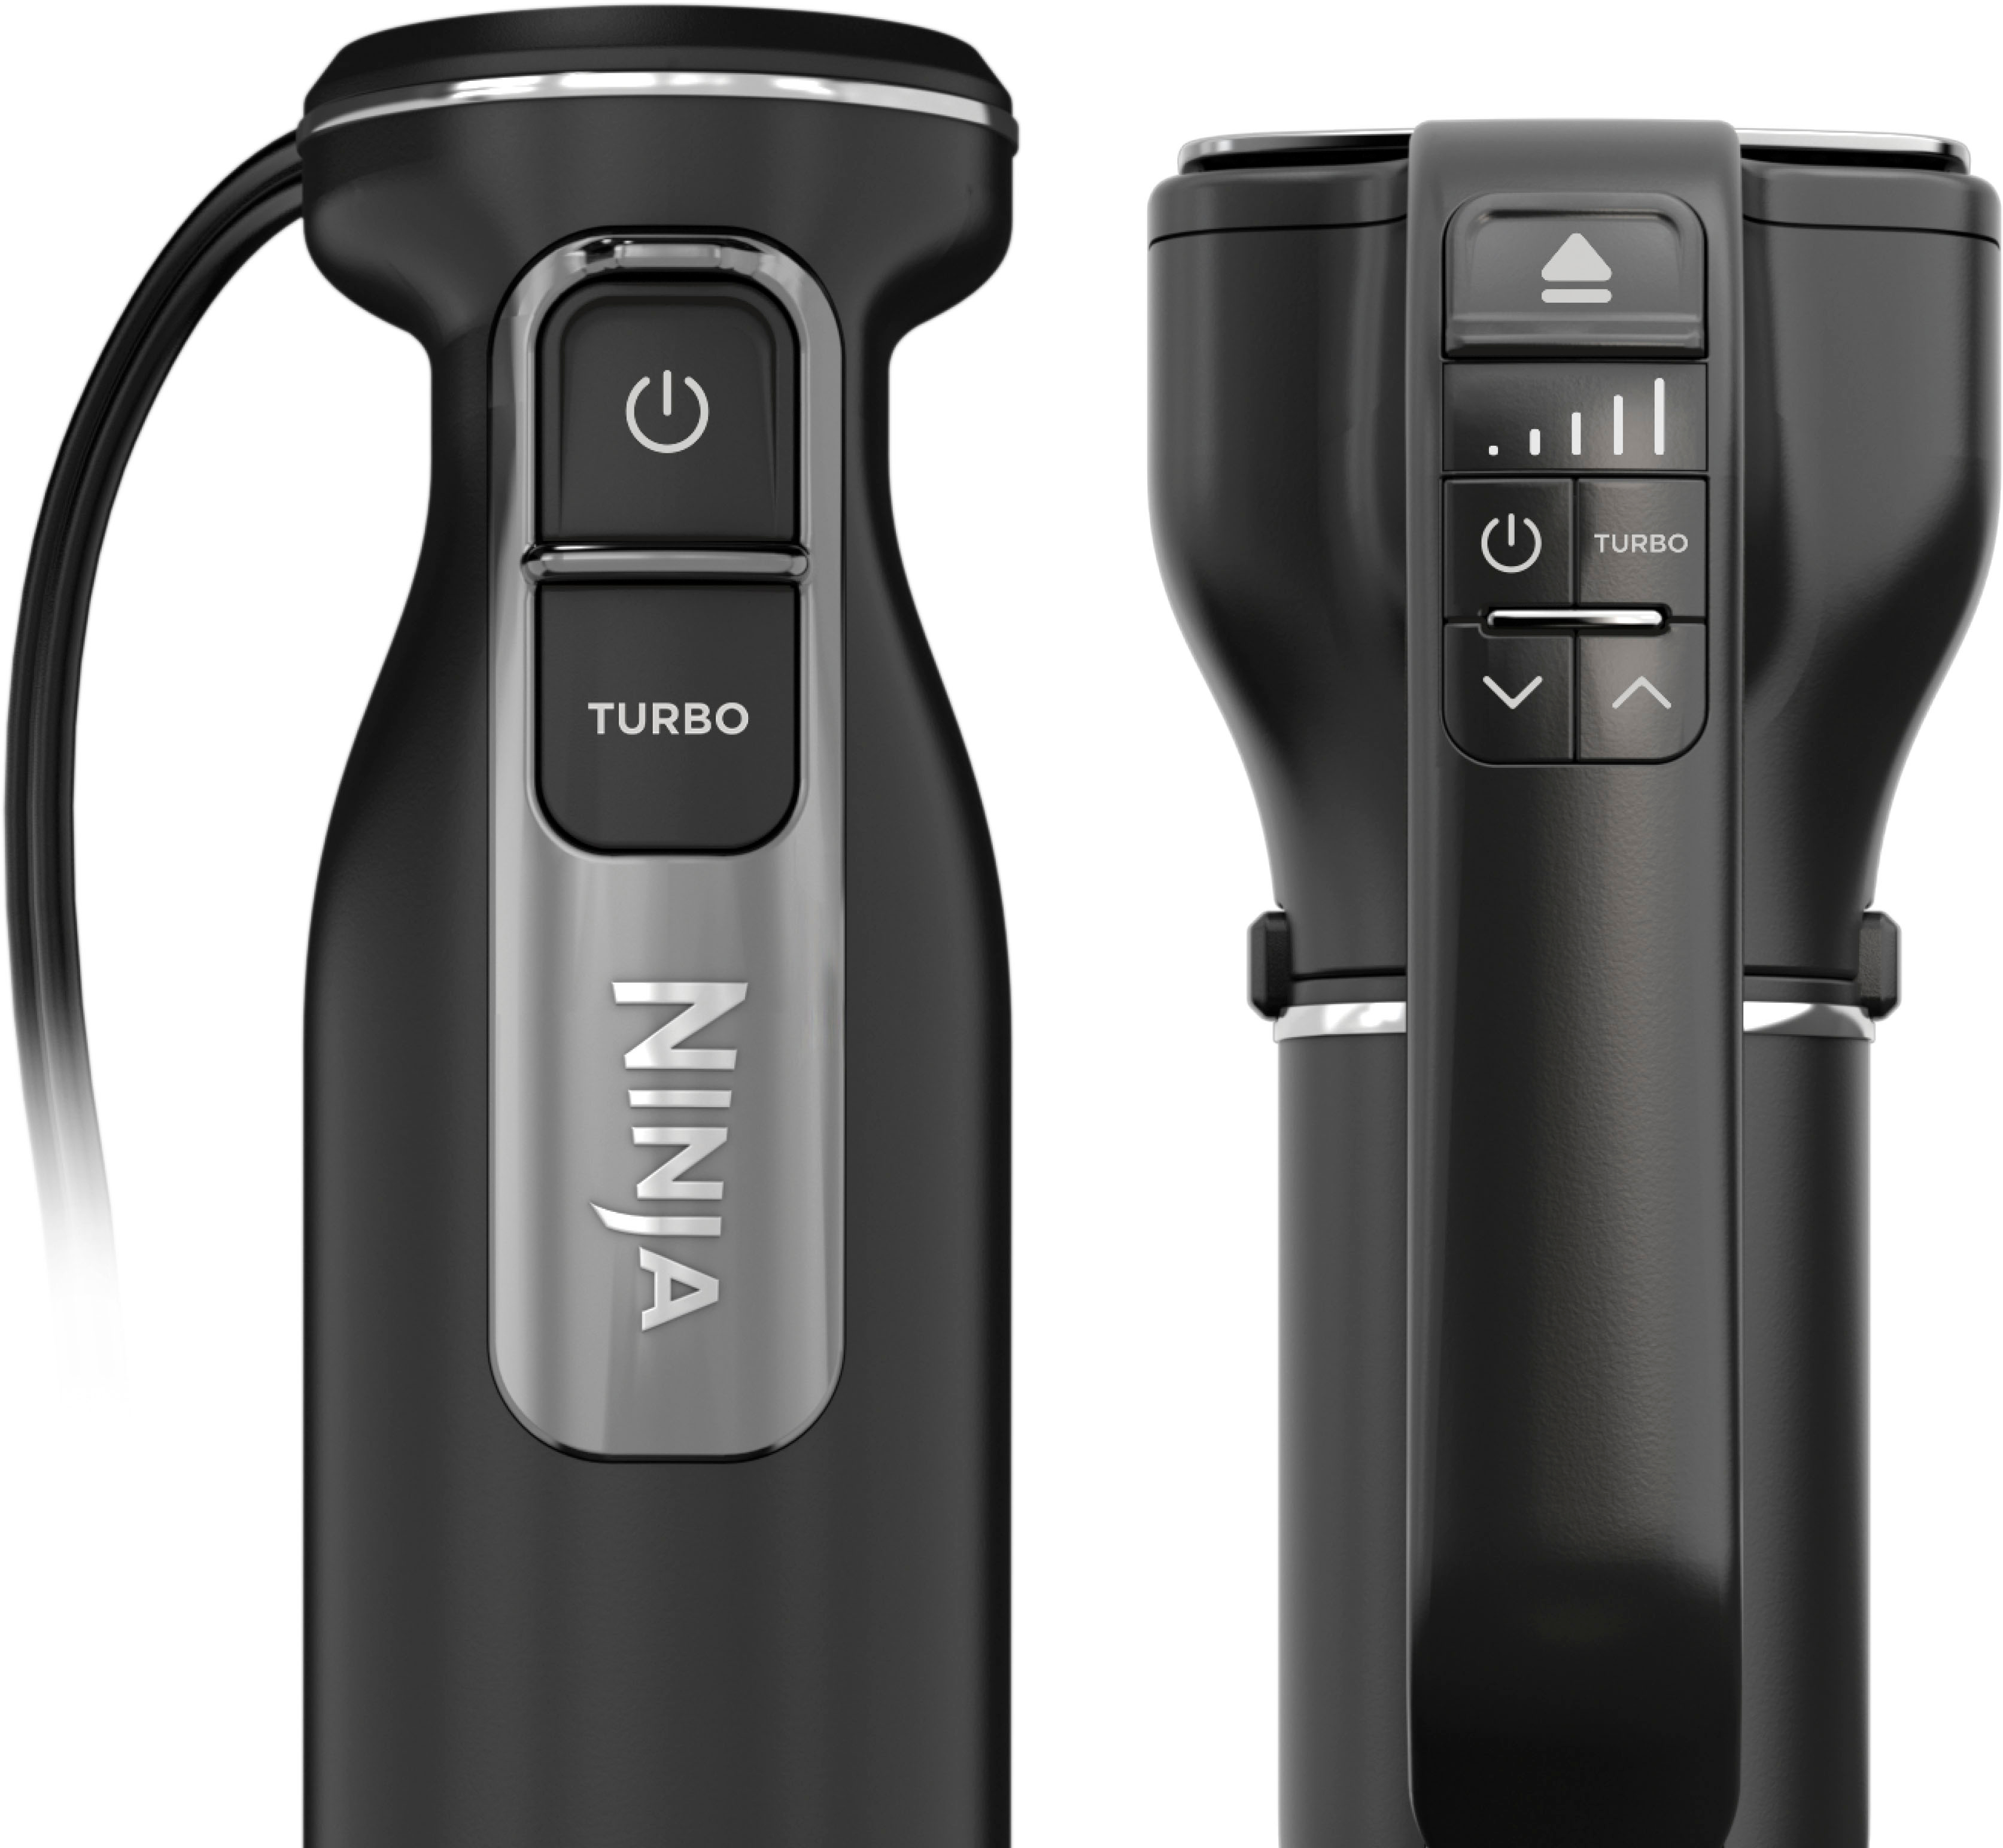 Ninja Foodi Power Mixer System 5-Speed Hand Blender and Hand Mixer Combo  with 3-Cup Blending Vessel Black CI101 - Best Buy